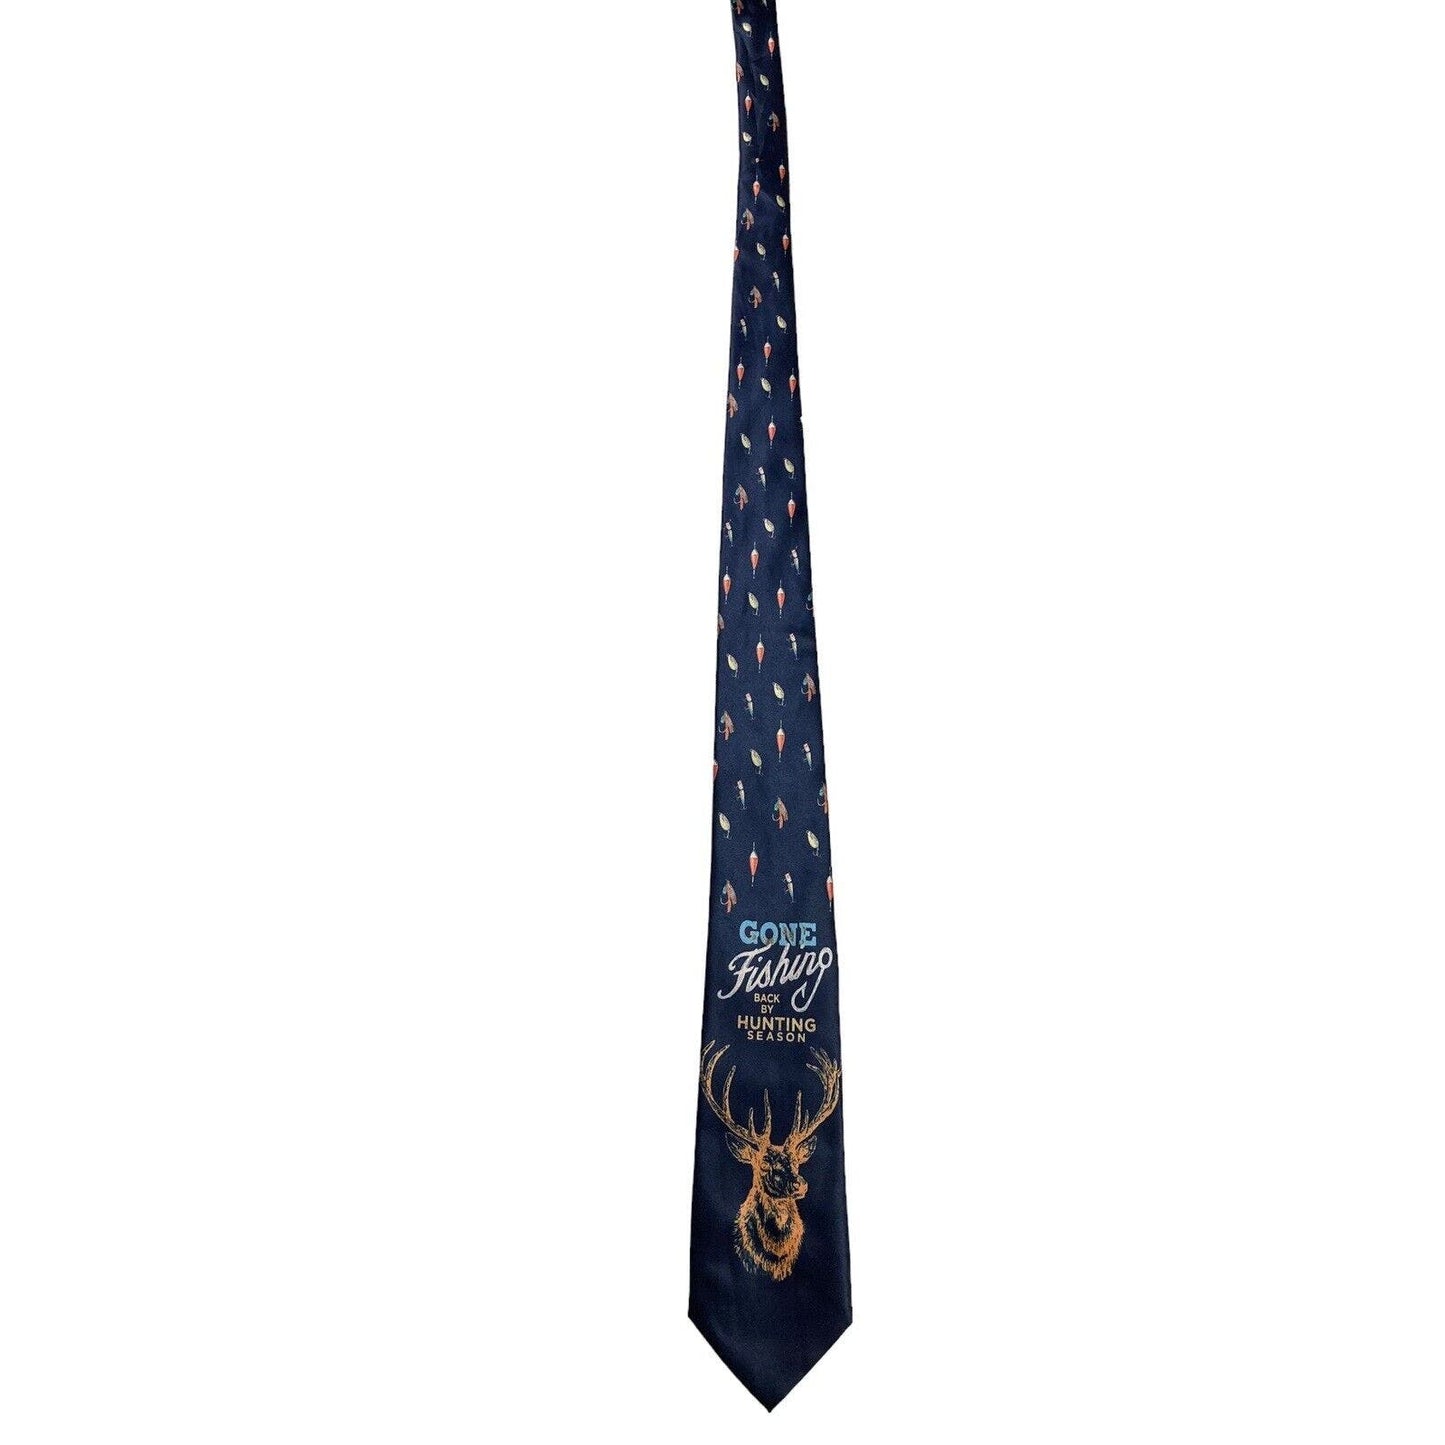 Knotty And Nice Gone Fishing Be Back For Deer Hunting Season Necktie Blue